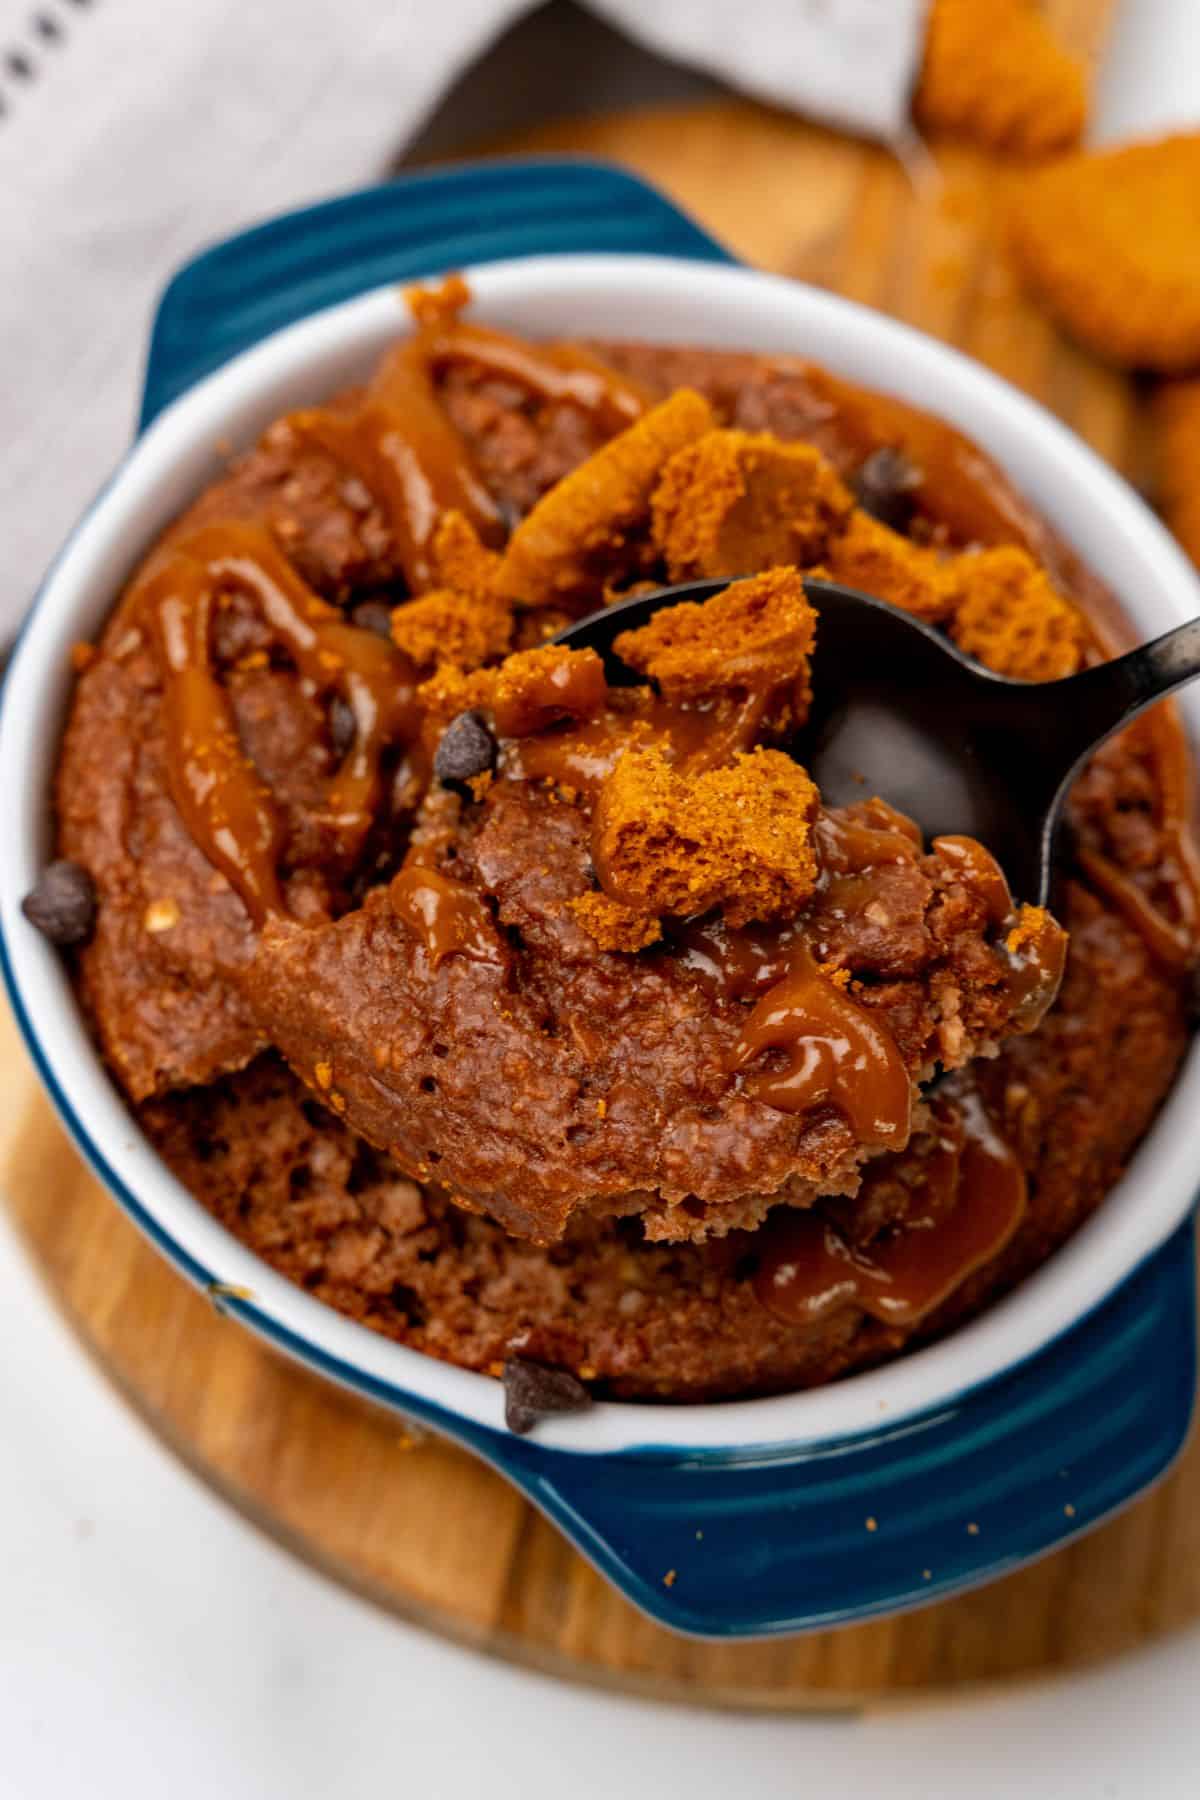 Biscoff baked oats in a ramekin dish with spoon being dished out. 